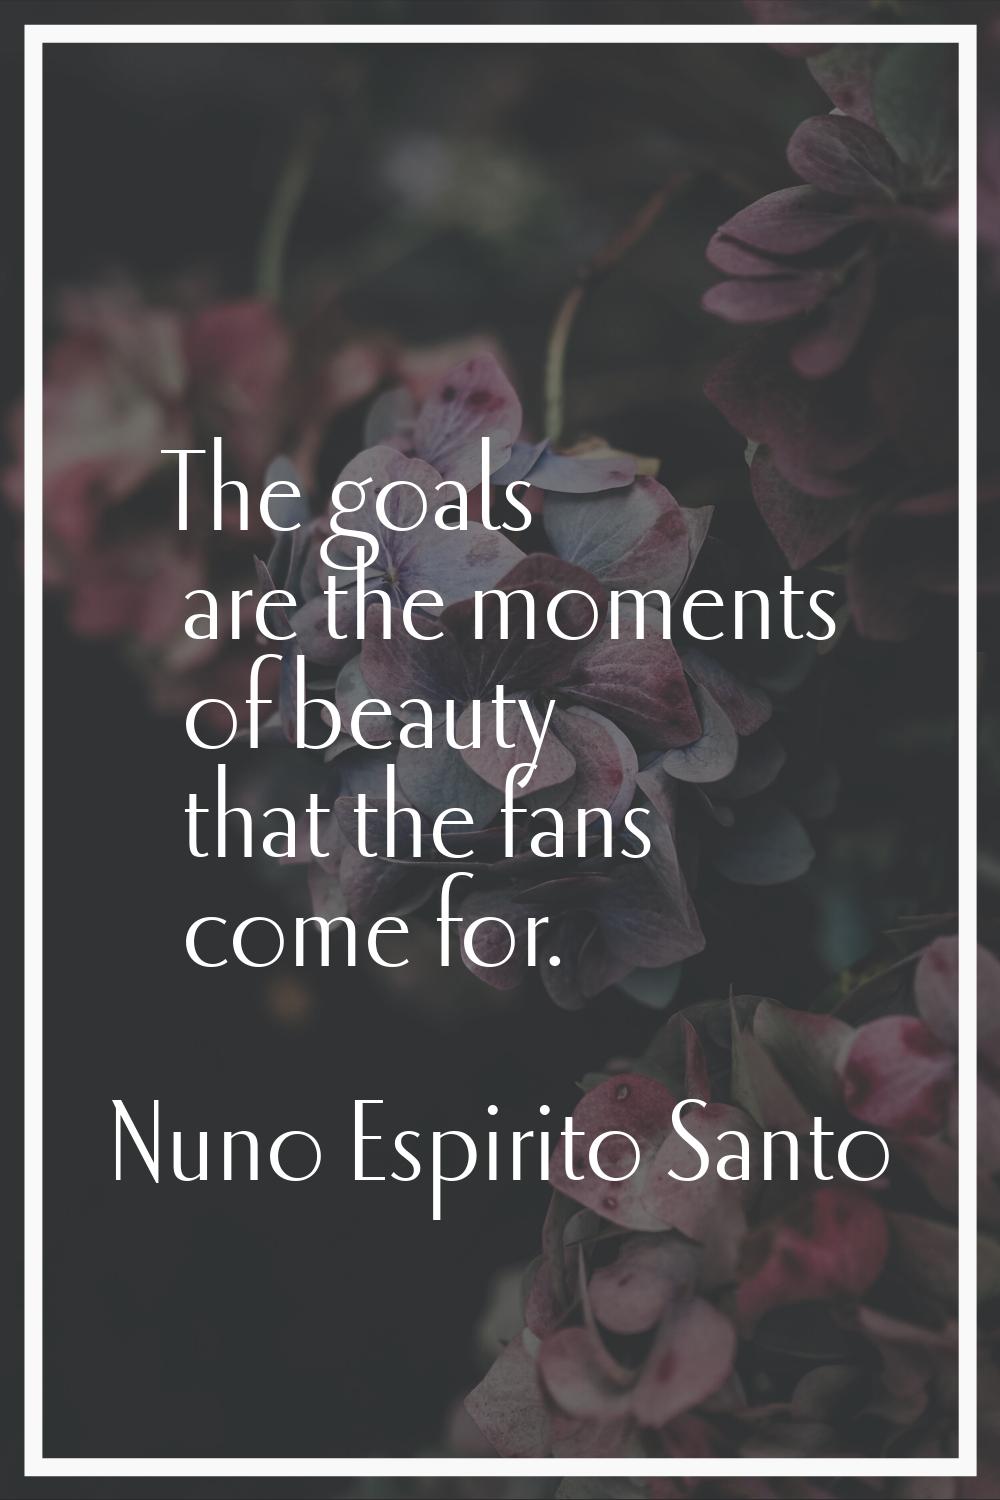 The goals are the moments of beauty that the fans come for.